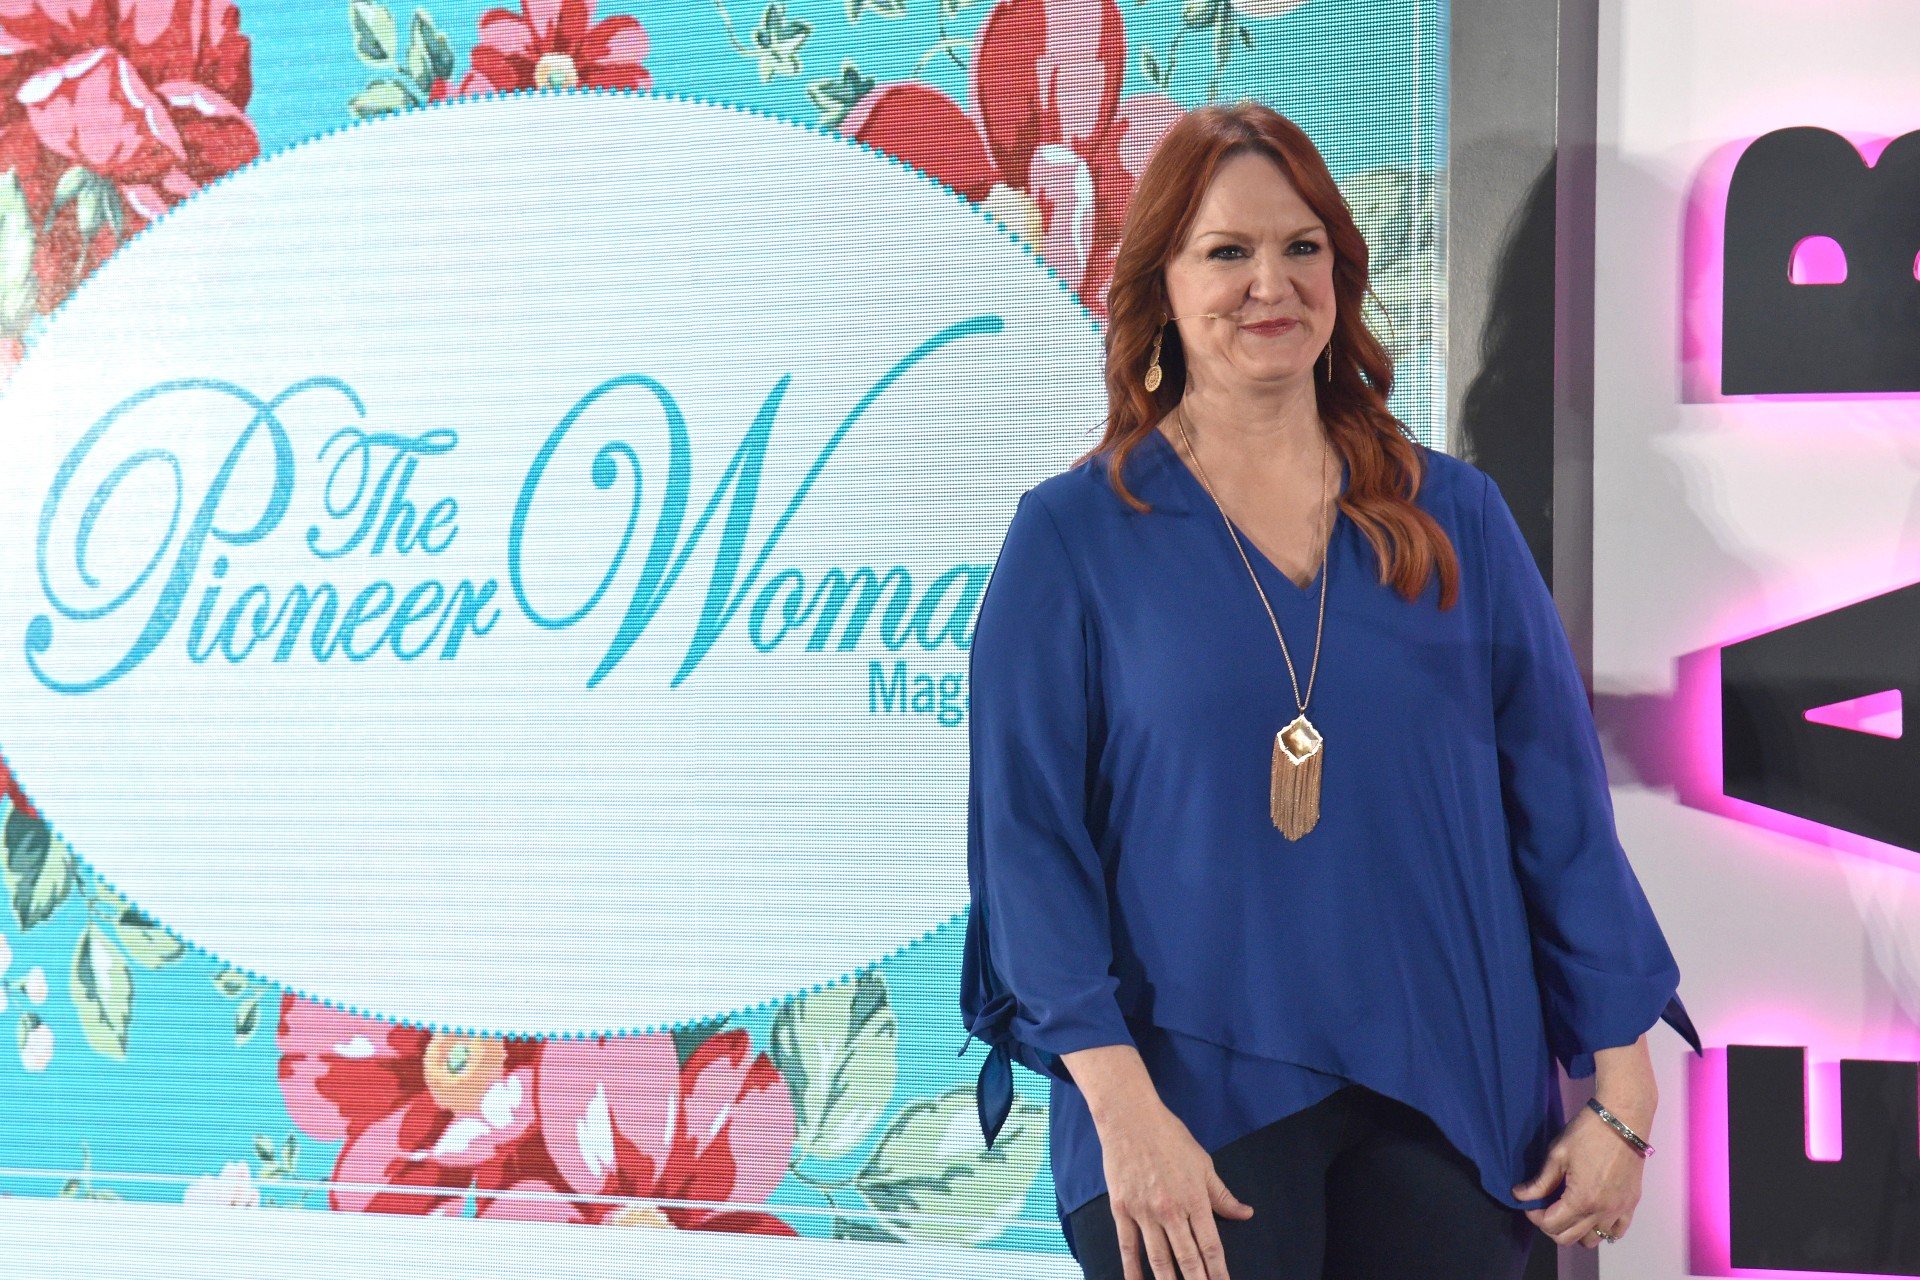 The Pioneer Woman Ree Drummond wears a blue shirt and smiles at a Hearst magazine event.